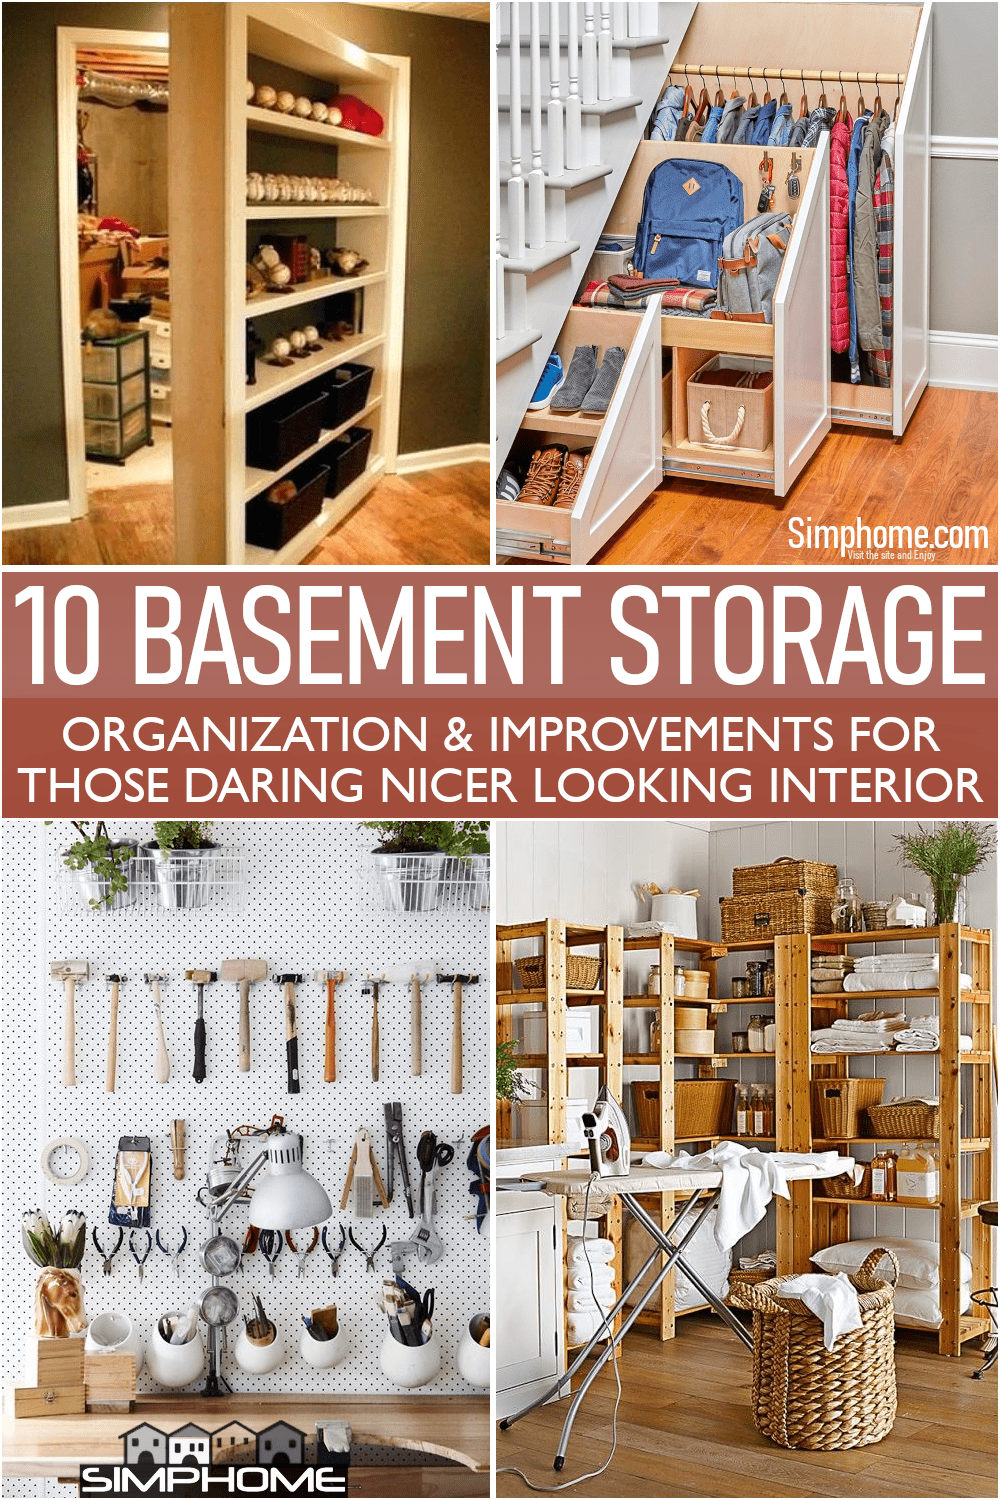 This is the poster for our 10 Basement Storage Room Optimizations